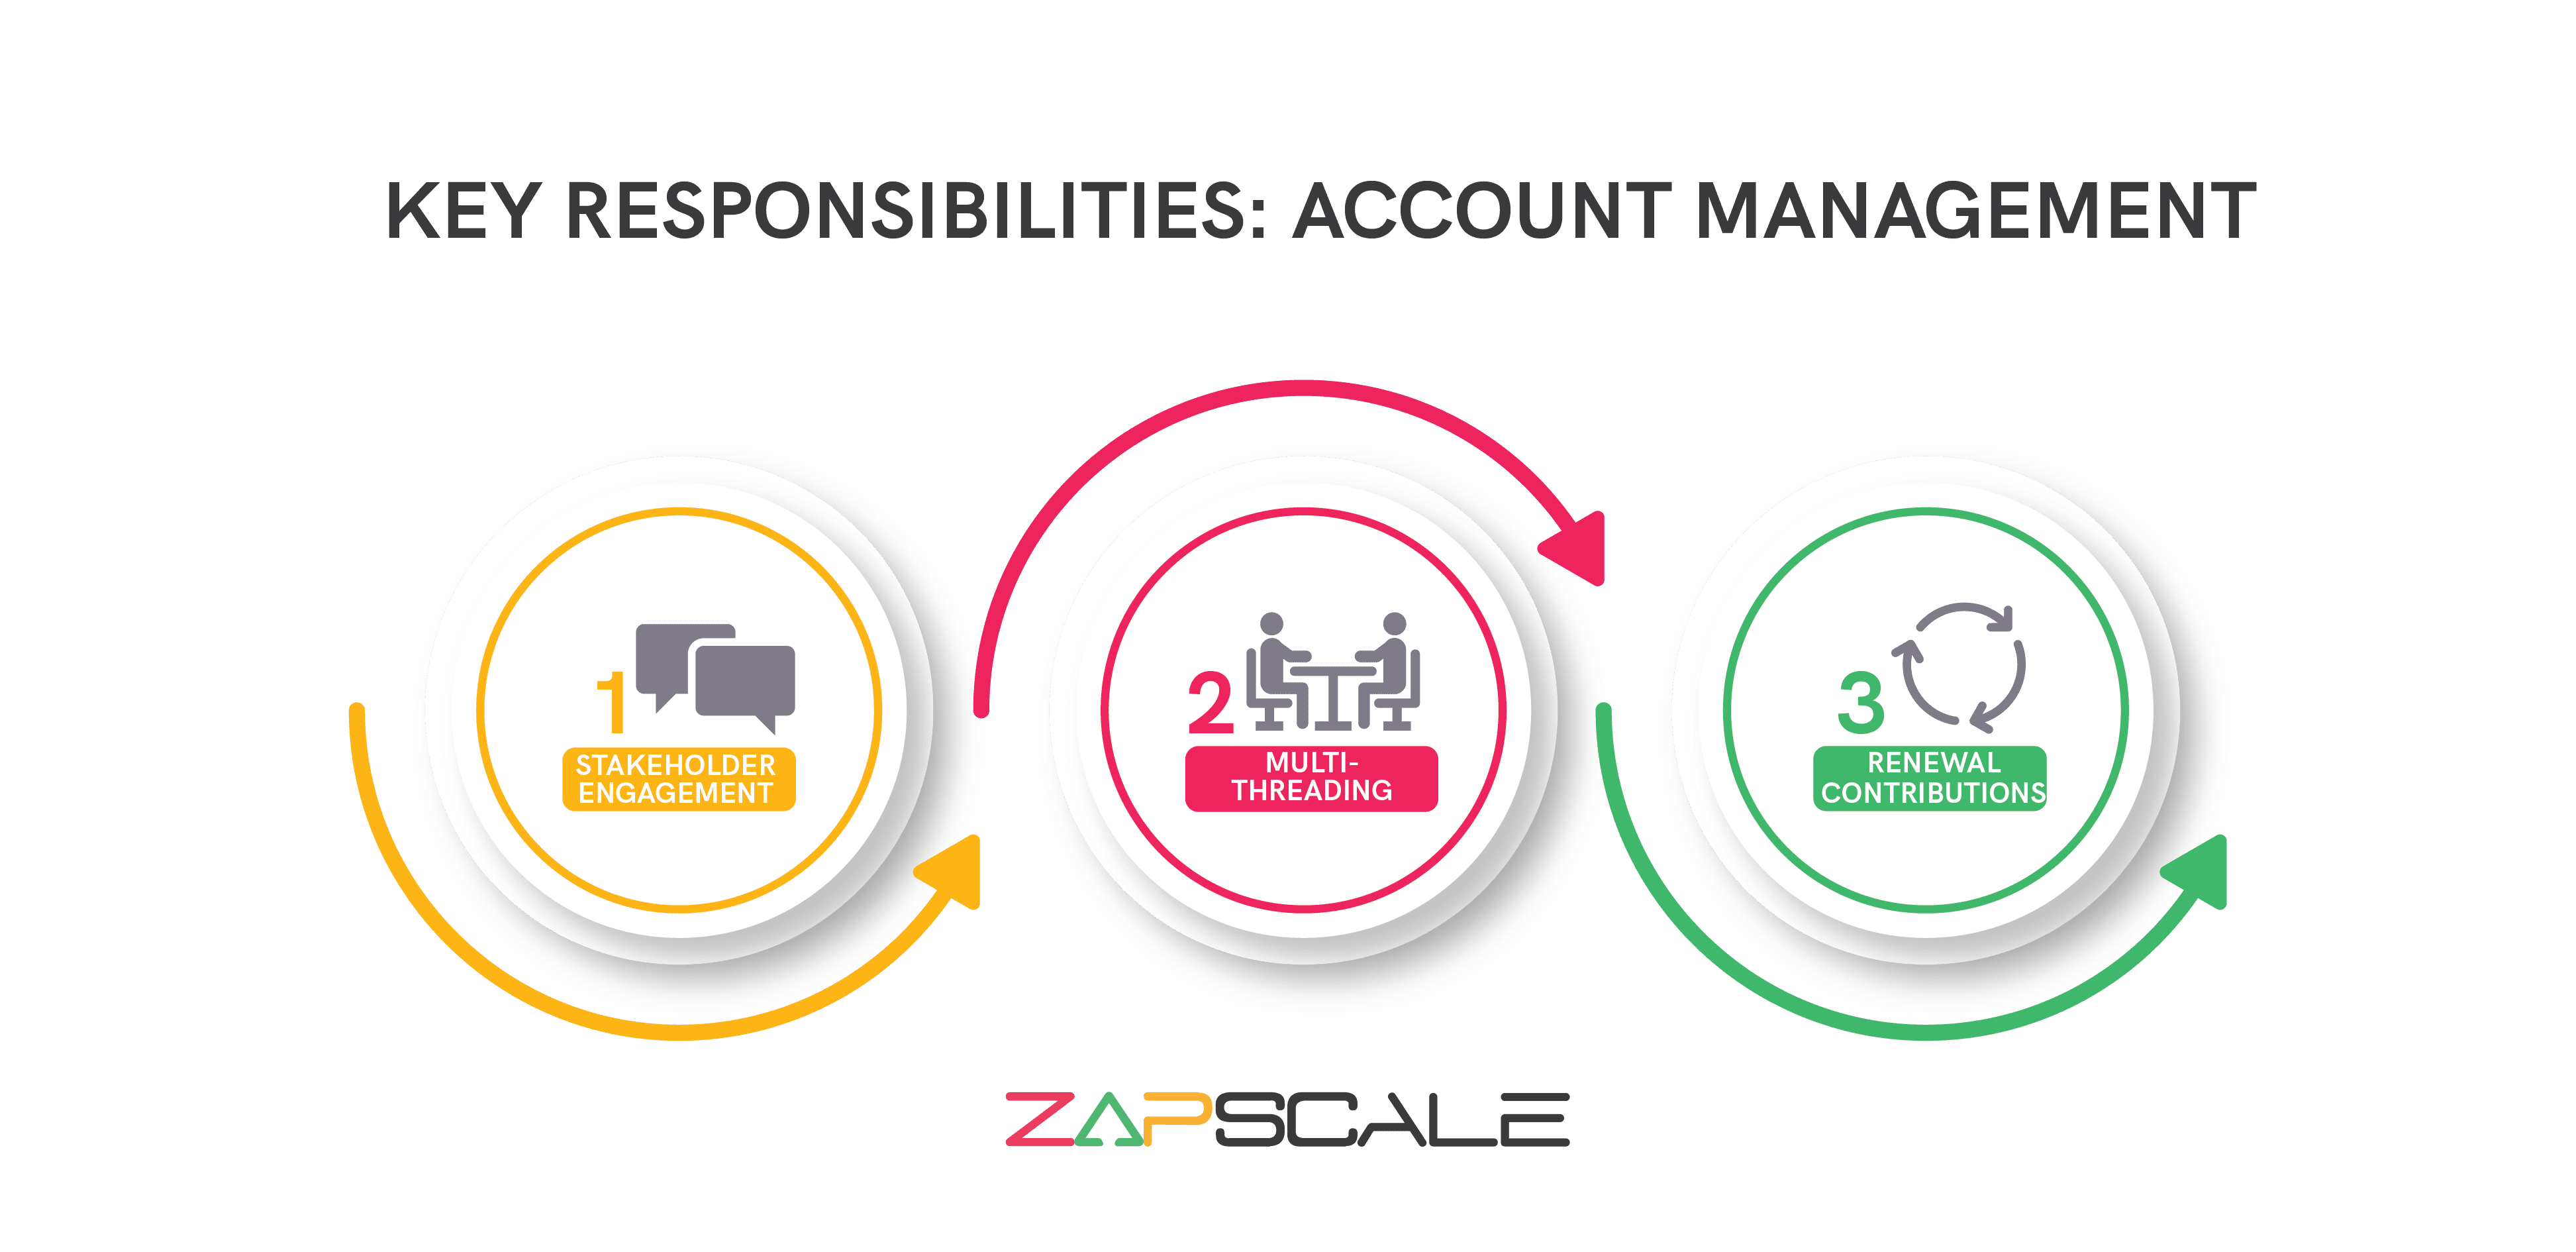 Infographic showing key responsibilities of account management